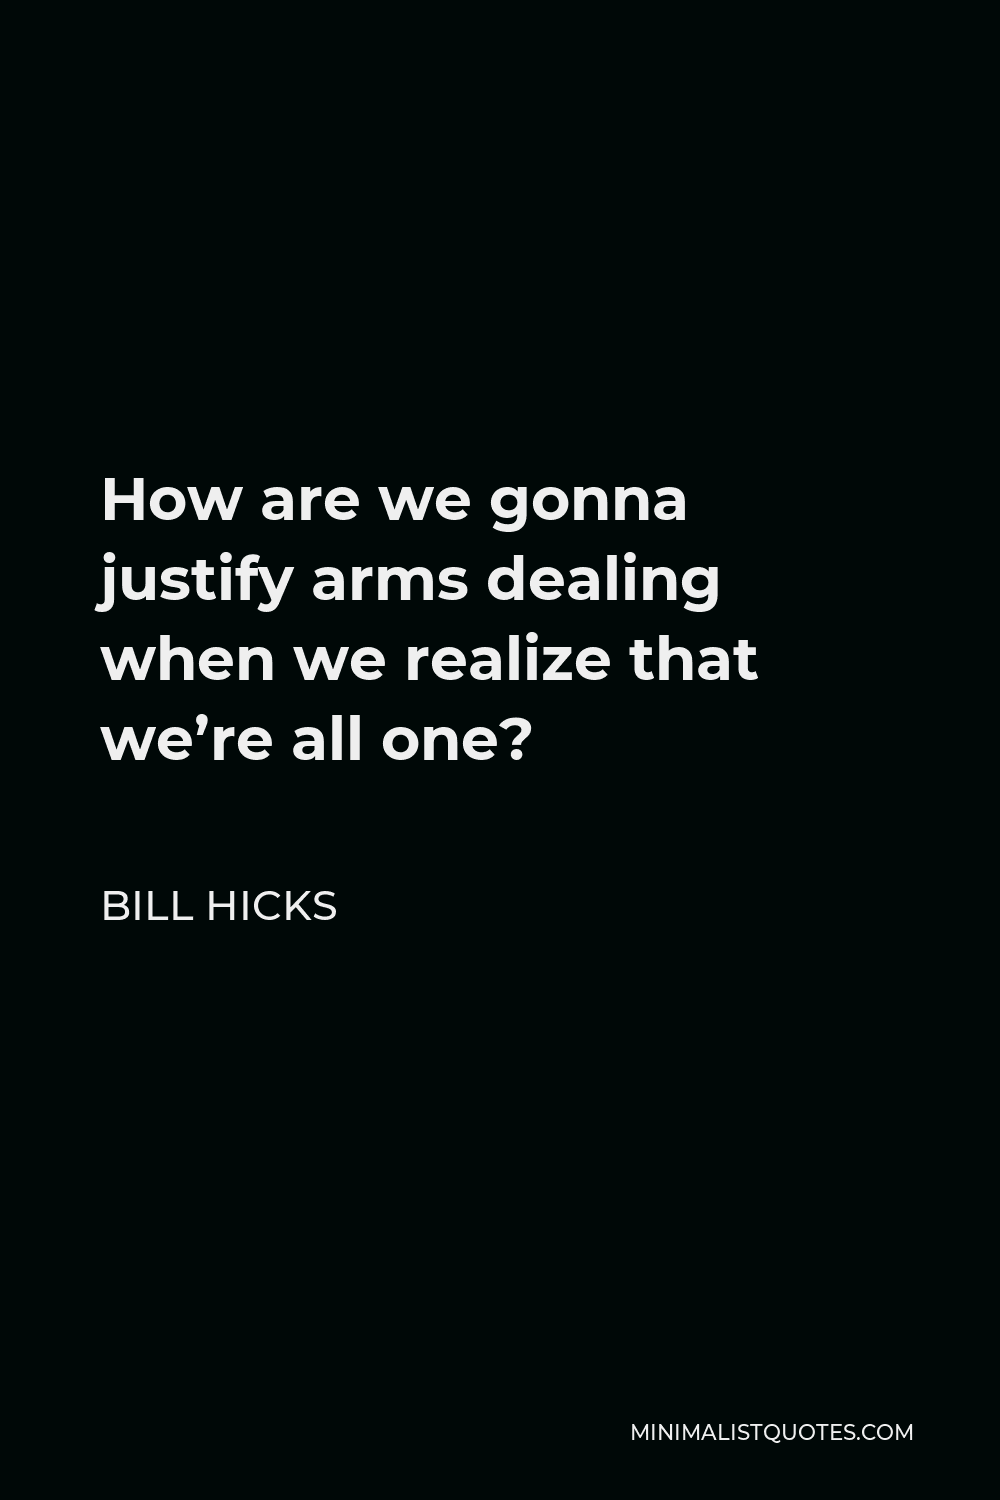 Bill Hicks Quote - How are we gonna justify arms dealing when we realize that we’re all one?